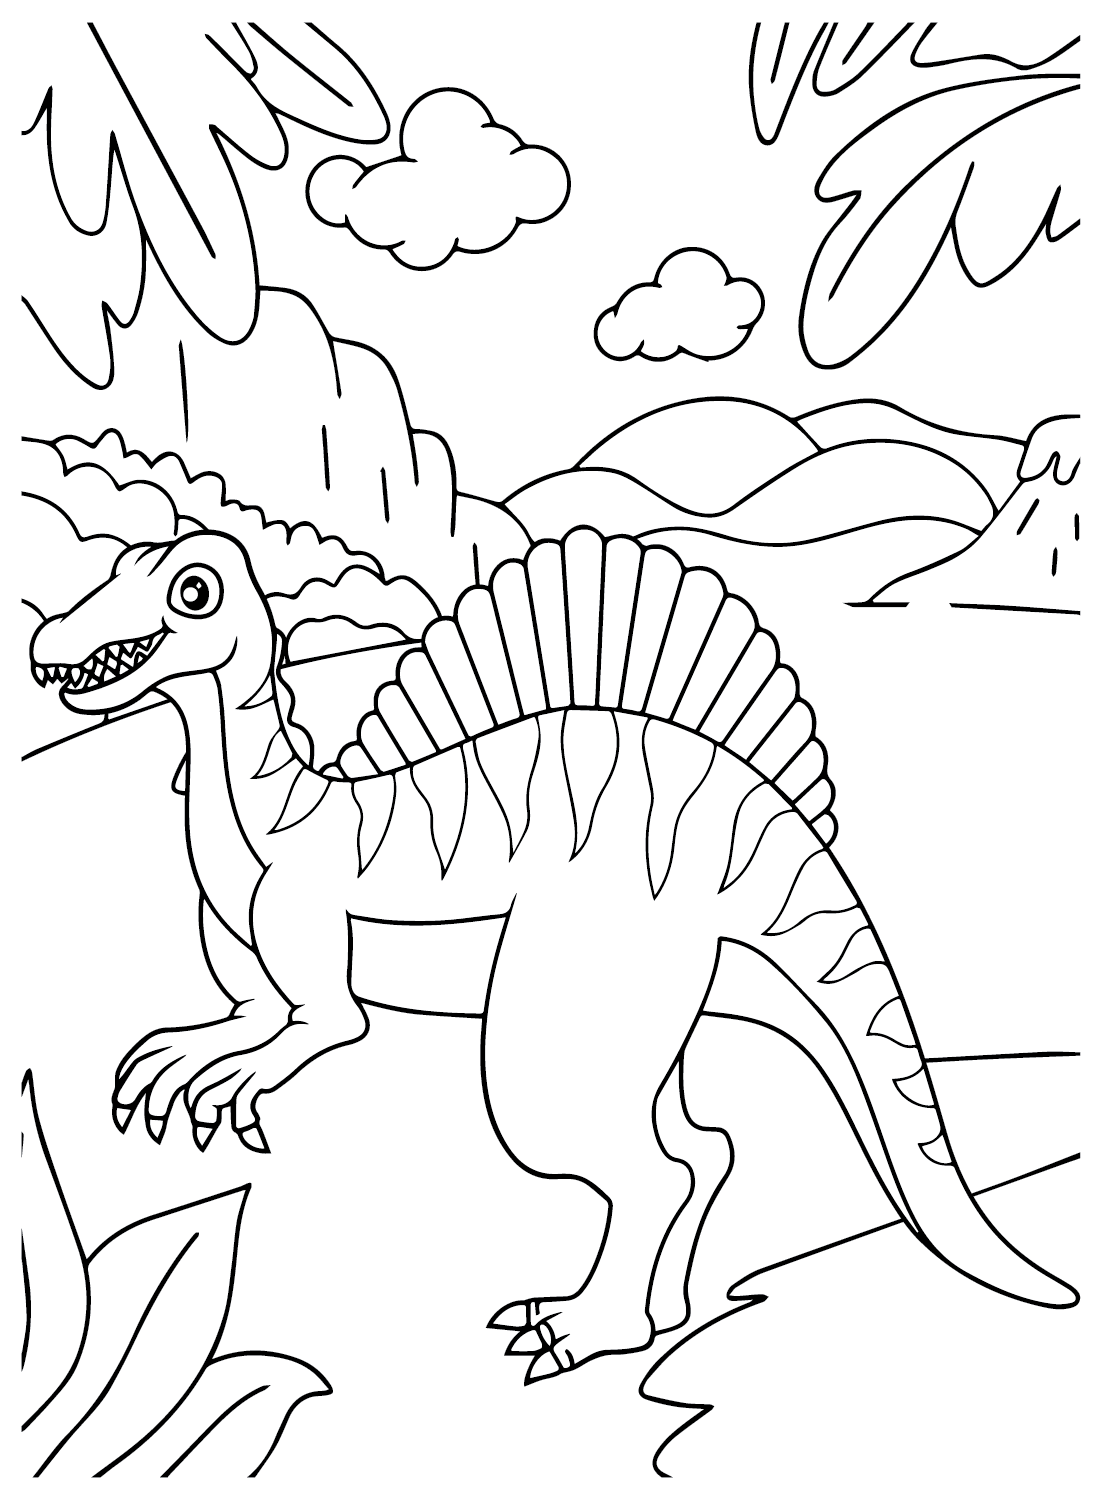 Spinosaurus Aegyptiacus Coloring Sheet for Kids from Spinosaurus Aegyptiacus